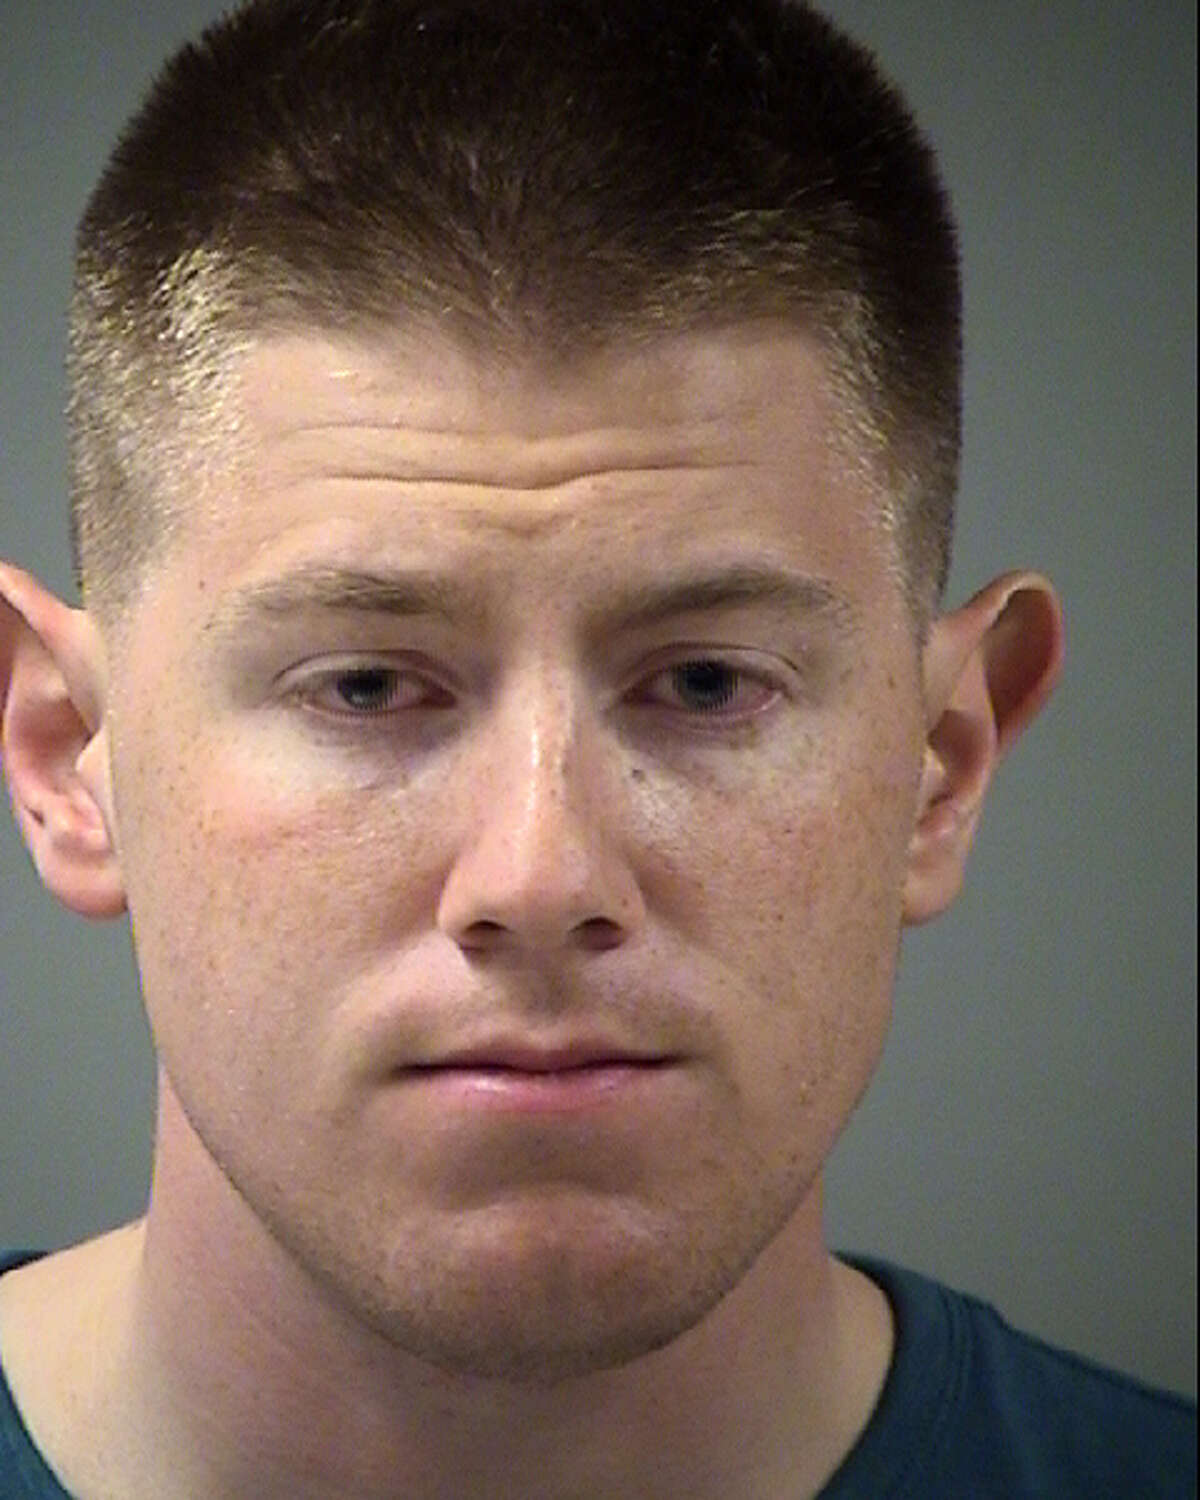 Officer Michael Sepanski, 25, is accused of using his forearm to block his wife's airway around midnight in the 2100 block of Atlas Bend and then fleeing the home.